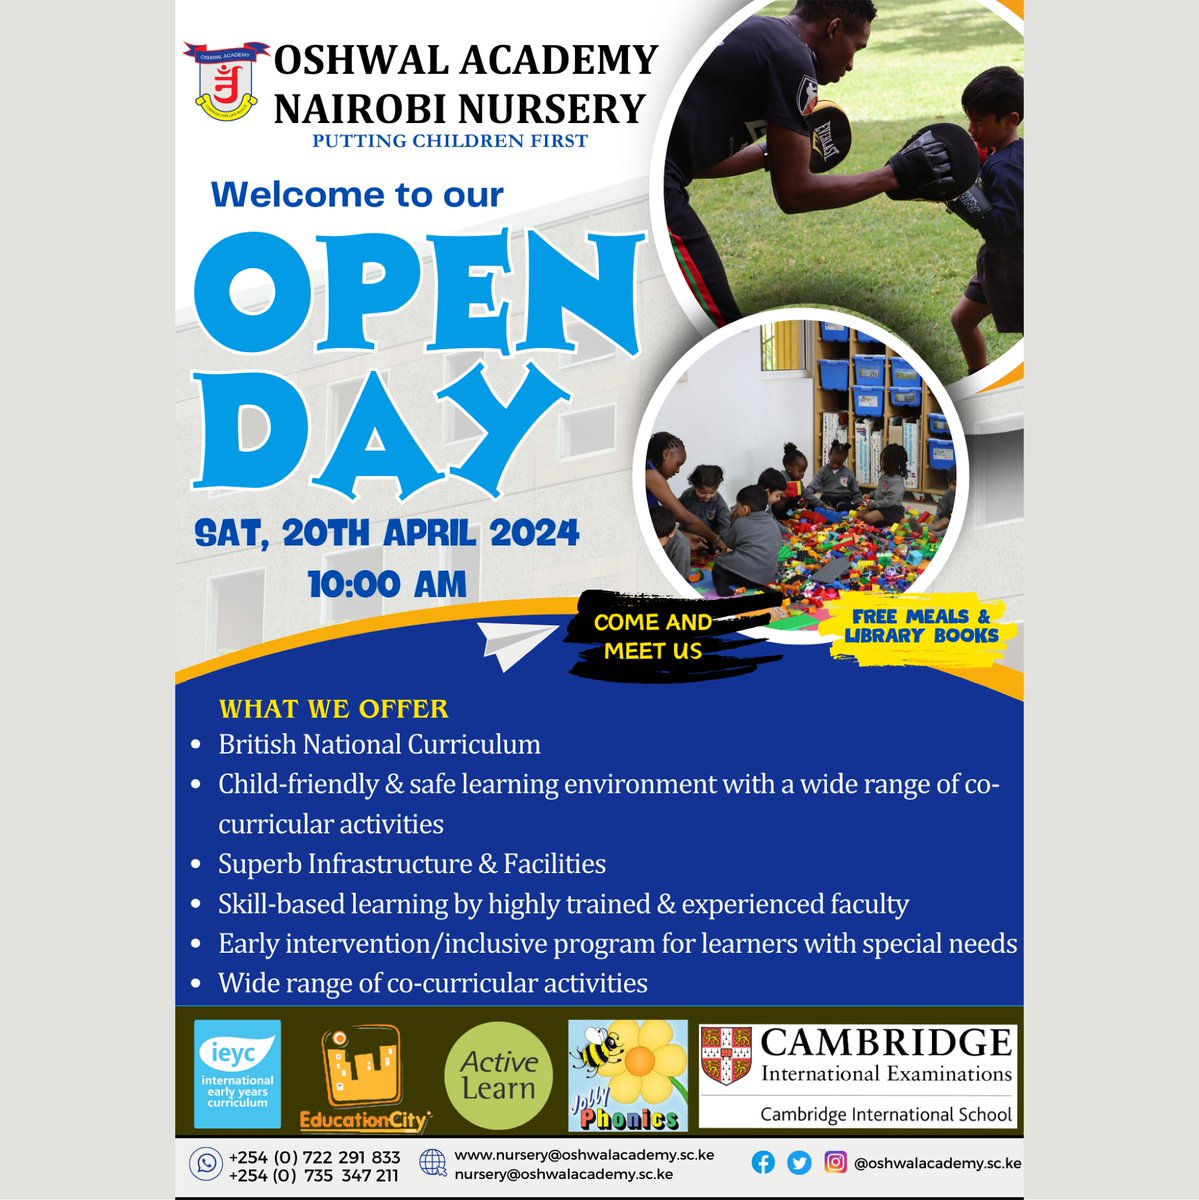 NURSERY - UPCOMING EVENT

OPEN DAY & ORIENTATION

20TH APRIL 2024

Our Open Day at Oshwal Academy Nairobi Nursery is coming up on 20th April 2024. 

#OshwalAcademyNairobi #OpenDay #April20 #NurserySchool #EarlyYearsEducation